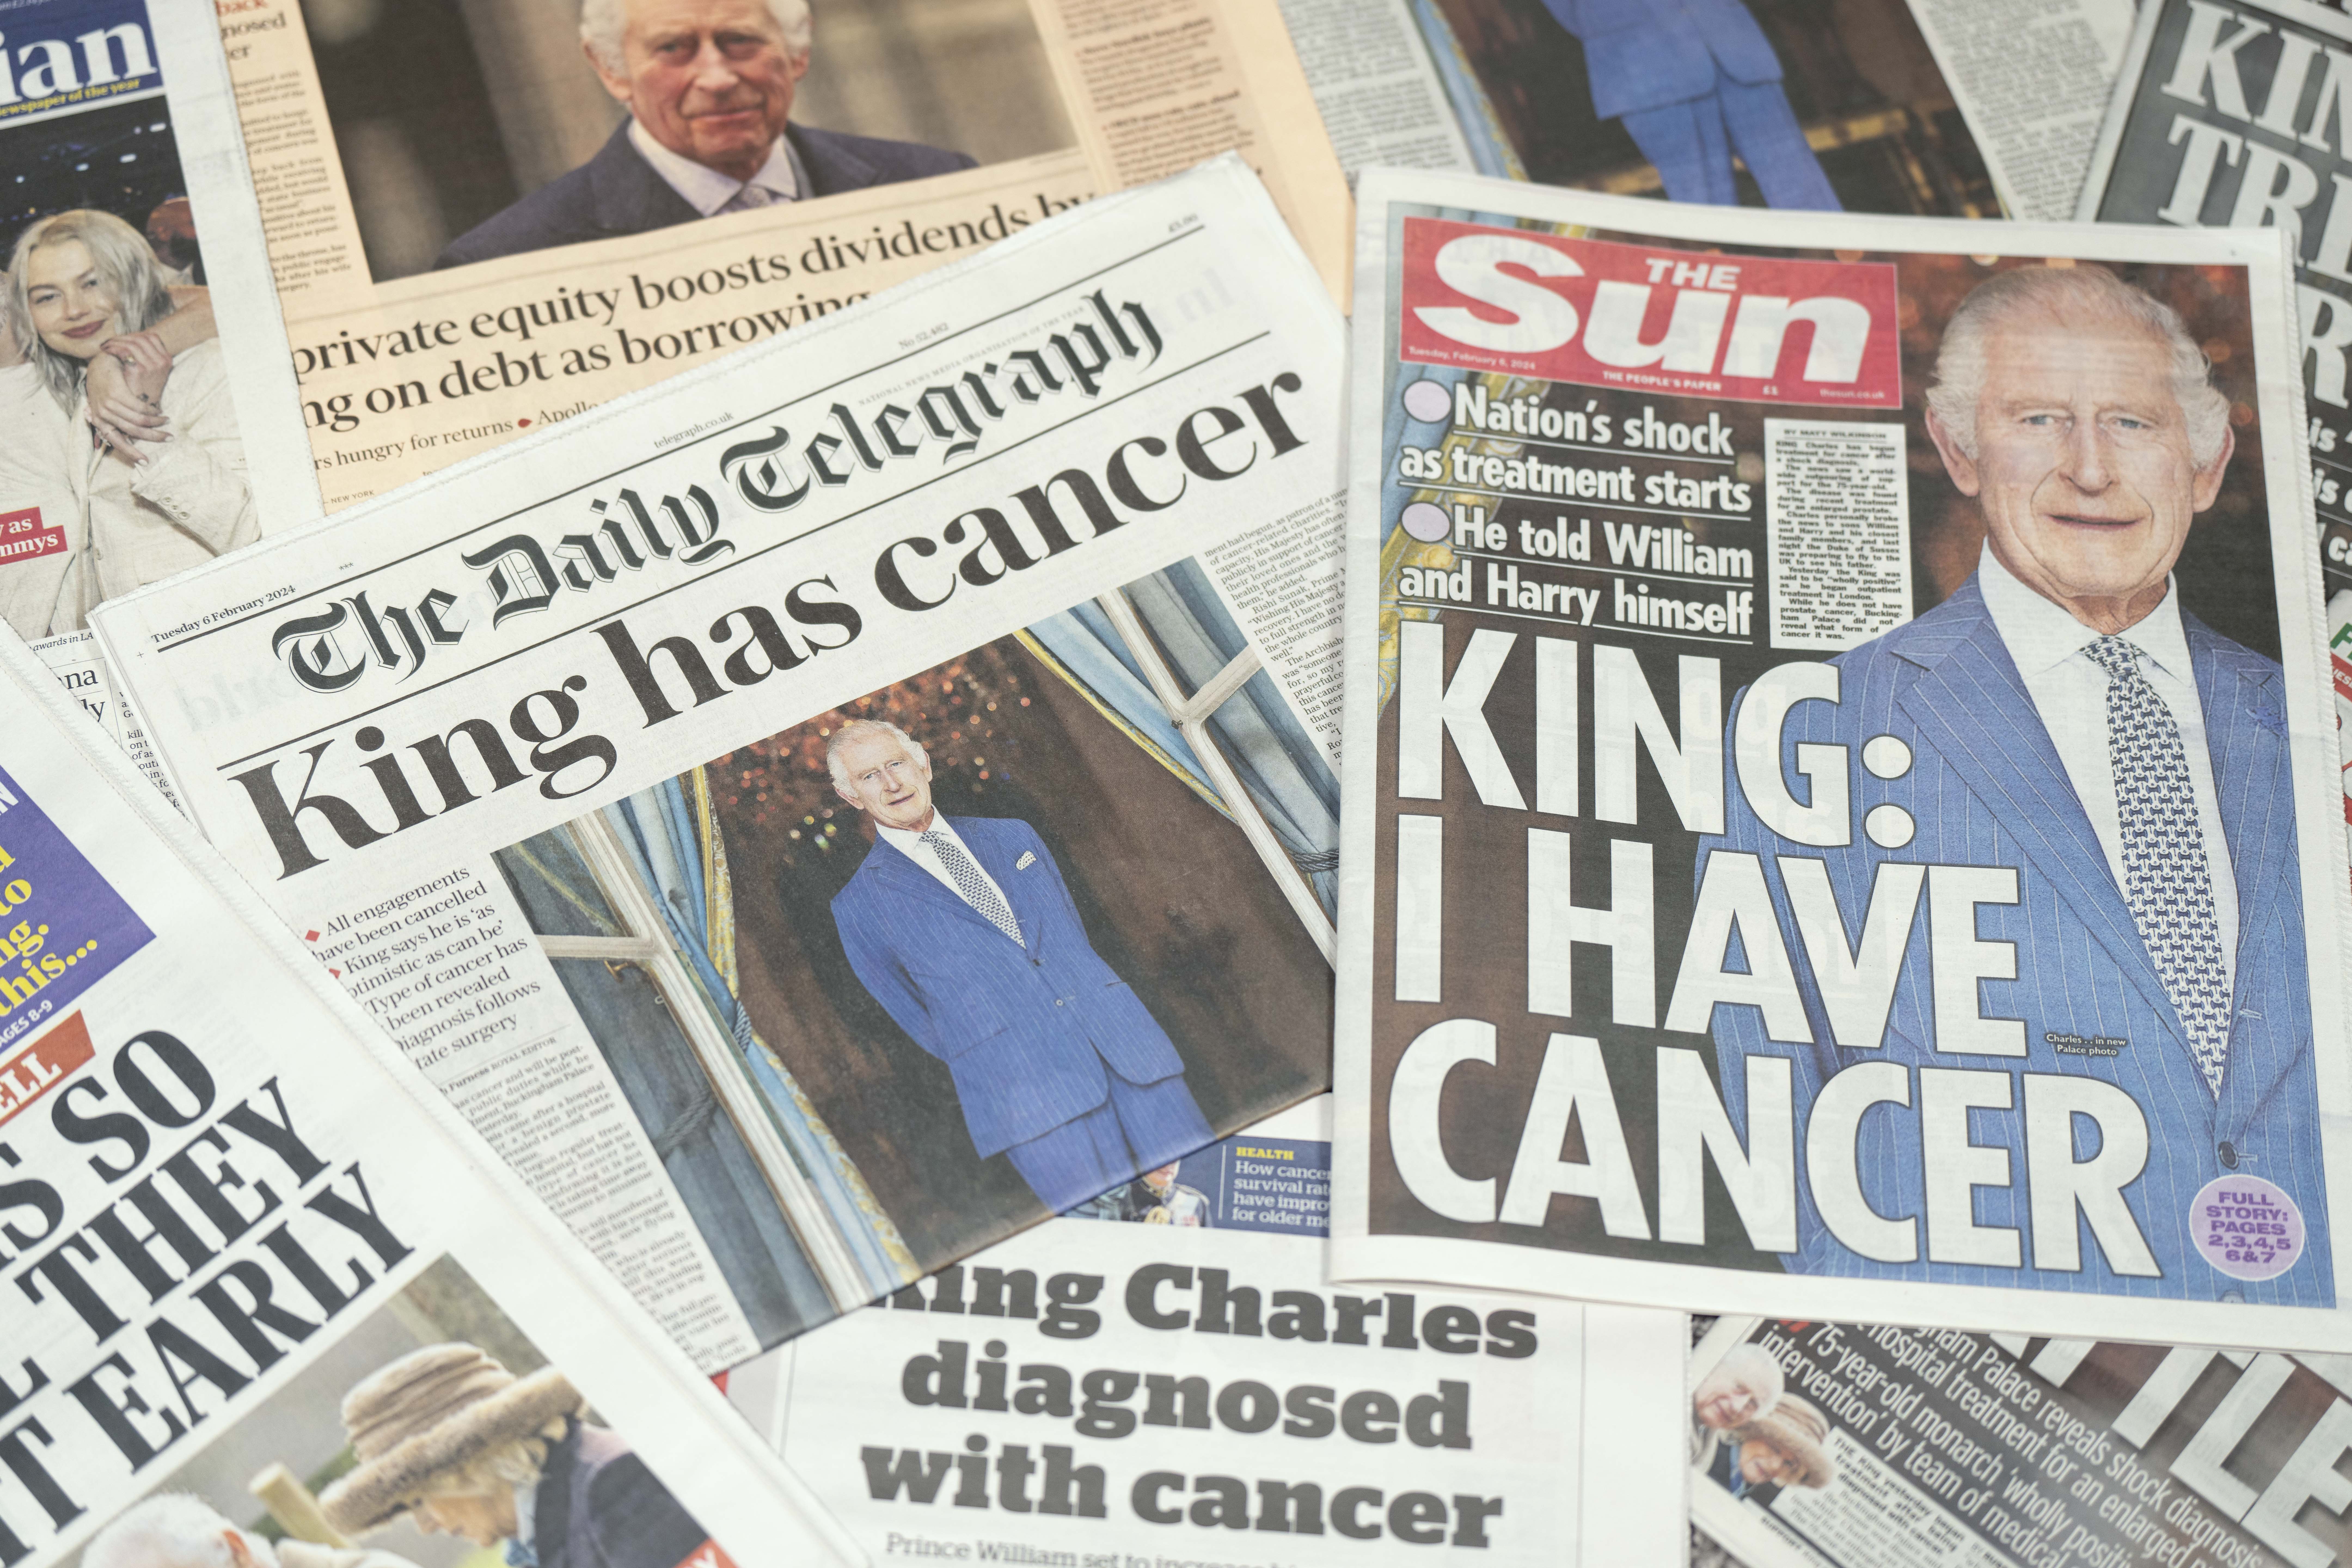 A selection of newspapers headlining King Charles III's cancer announcement | Source: Getty Images